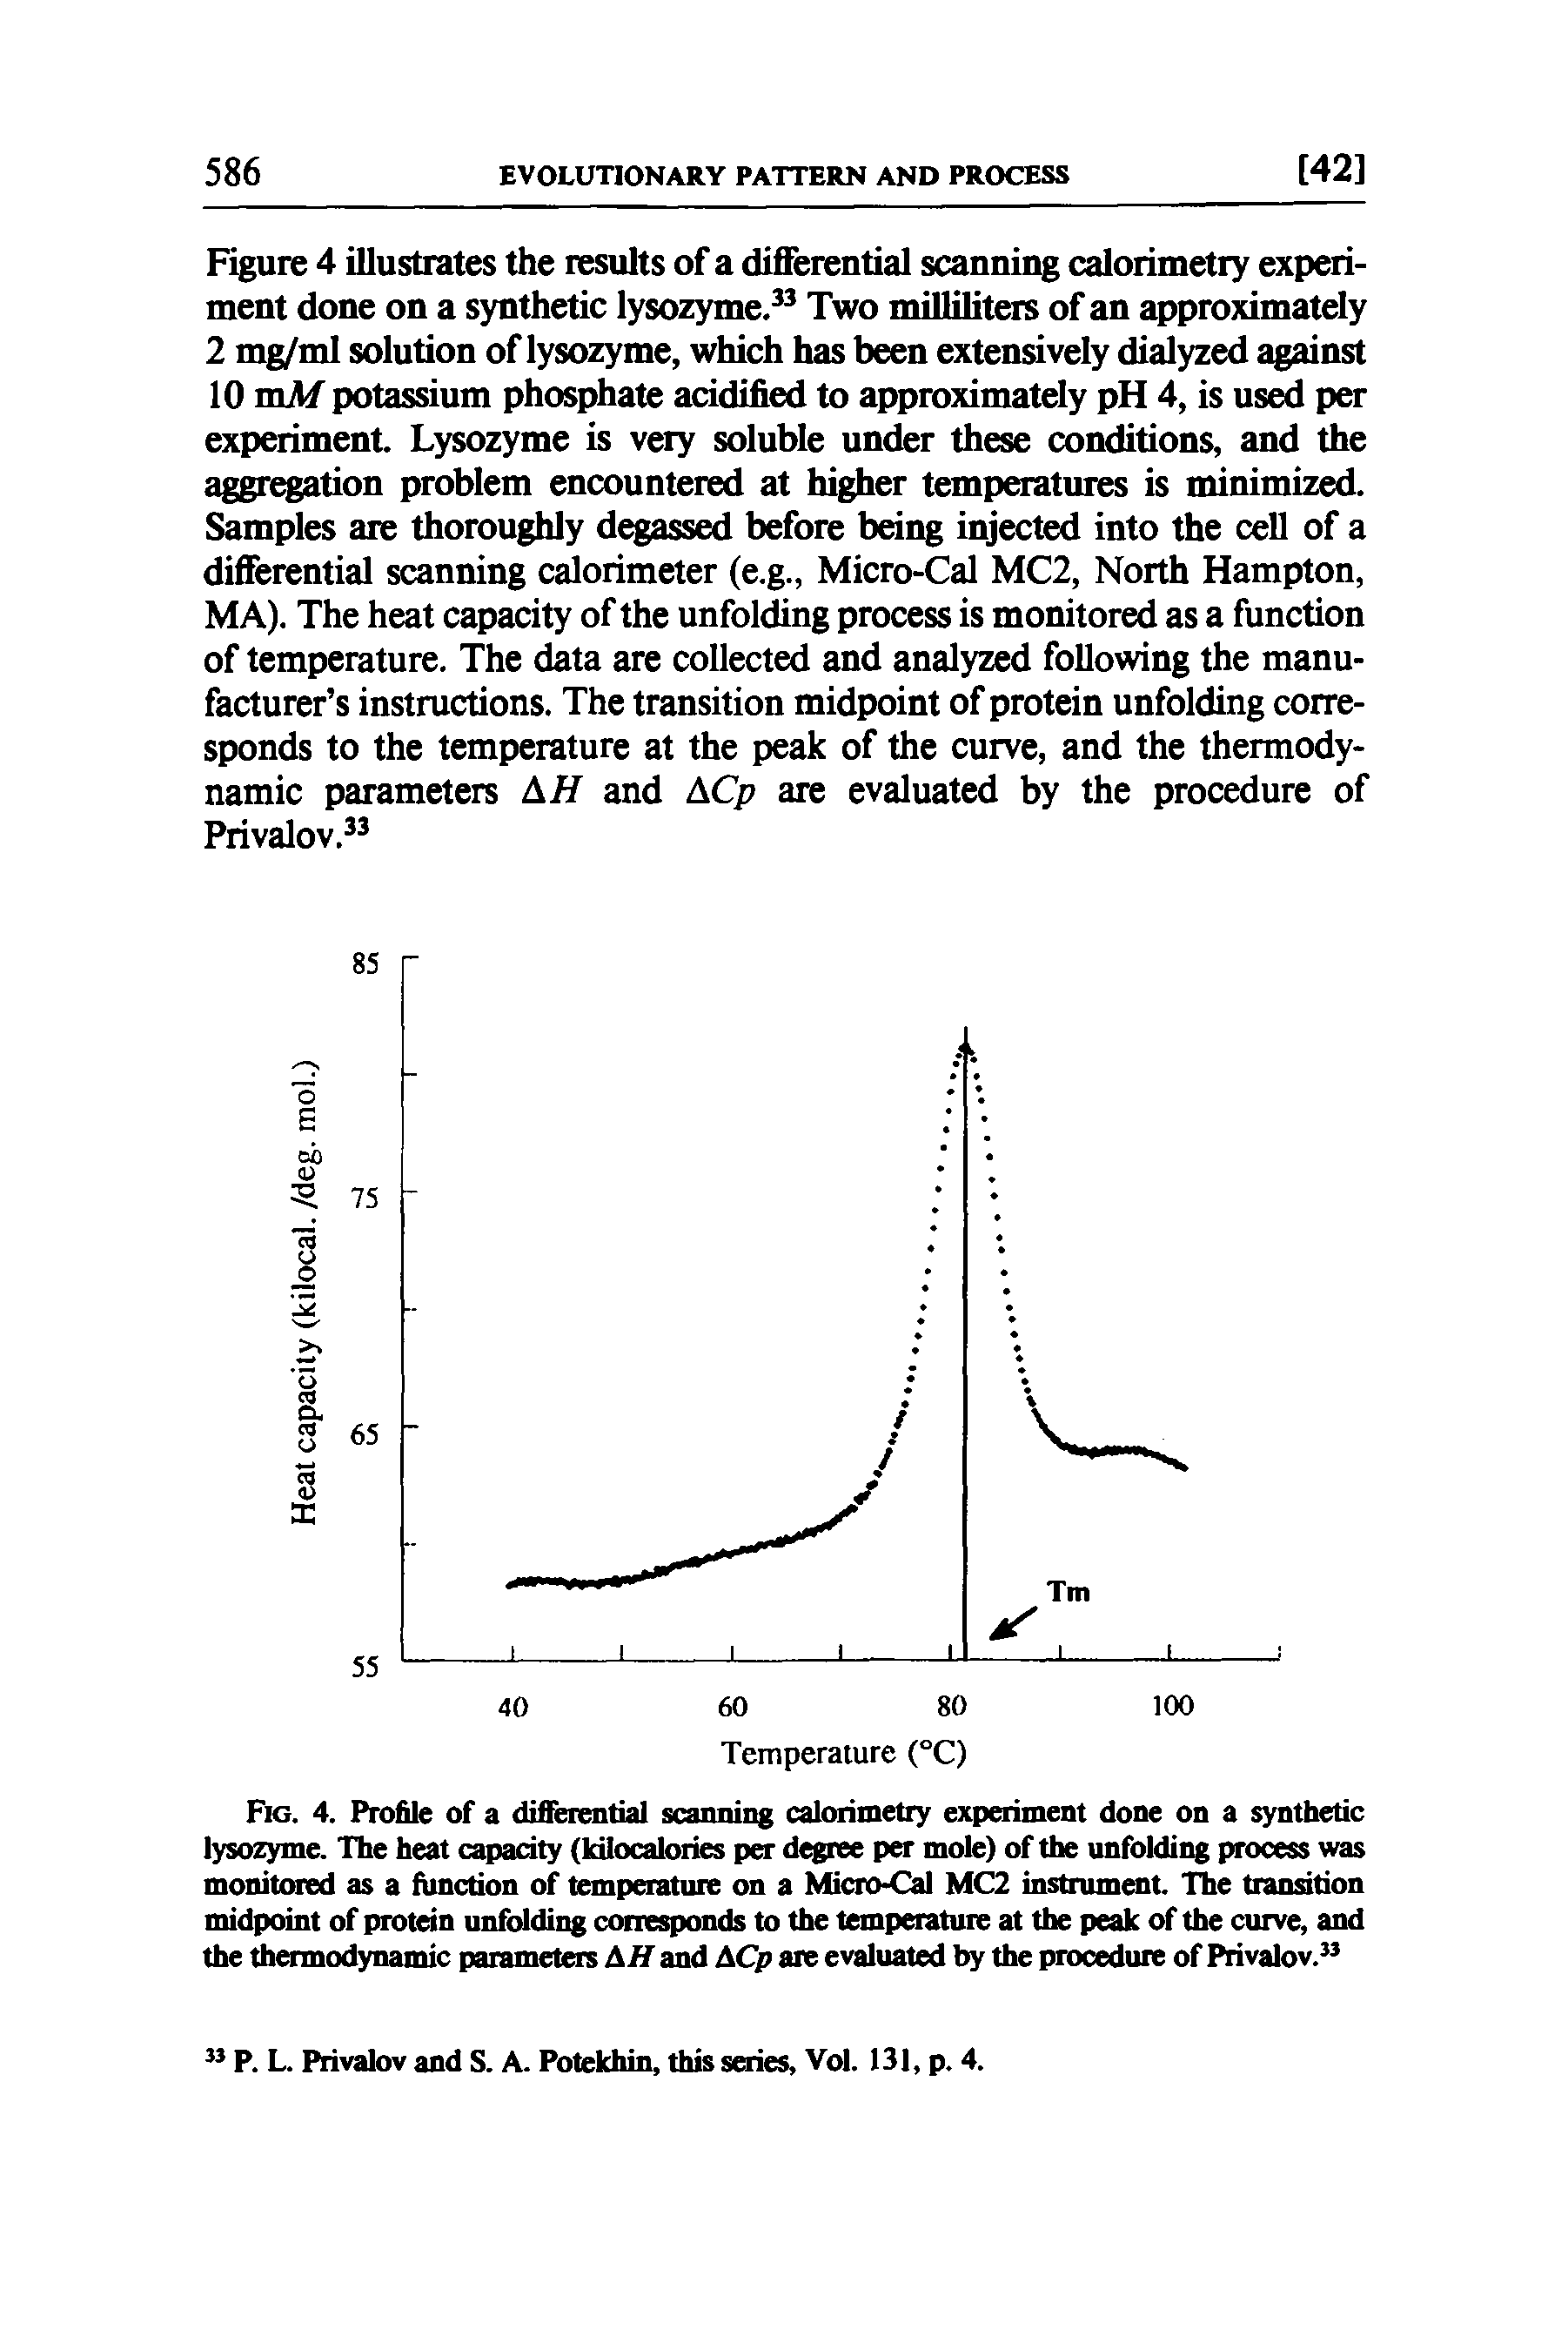 Fig. 4. Profile of a differential scanning calorimetry experiment done on a synthetic lysozyme. The heat capacity (kilocalories per degree per mole) of the unfolding process was monitored as a function of temperature on a Micro-Cal MC2 instrument. The transition midpoint of protein unfolding corresponds to the temperature at the peak of the curve, and the thermodynamic parameters A H and A Cp are evaluated by the procedure of Privalov.33...